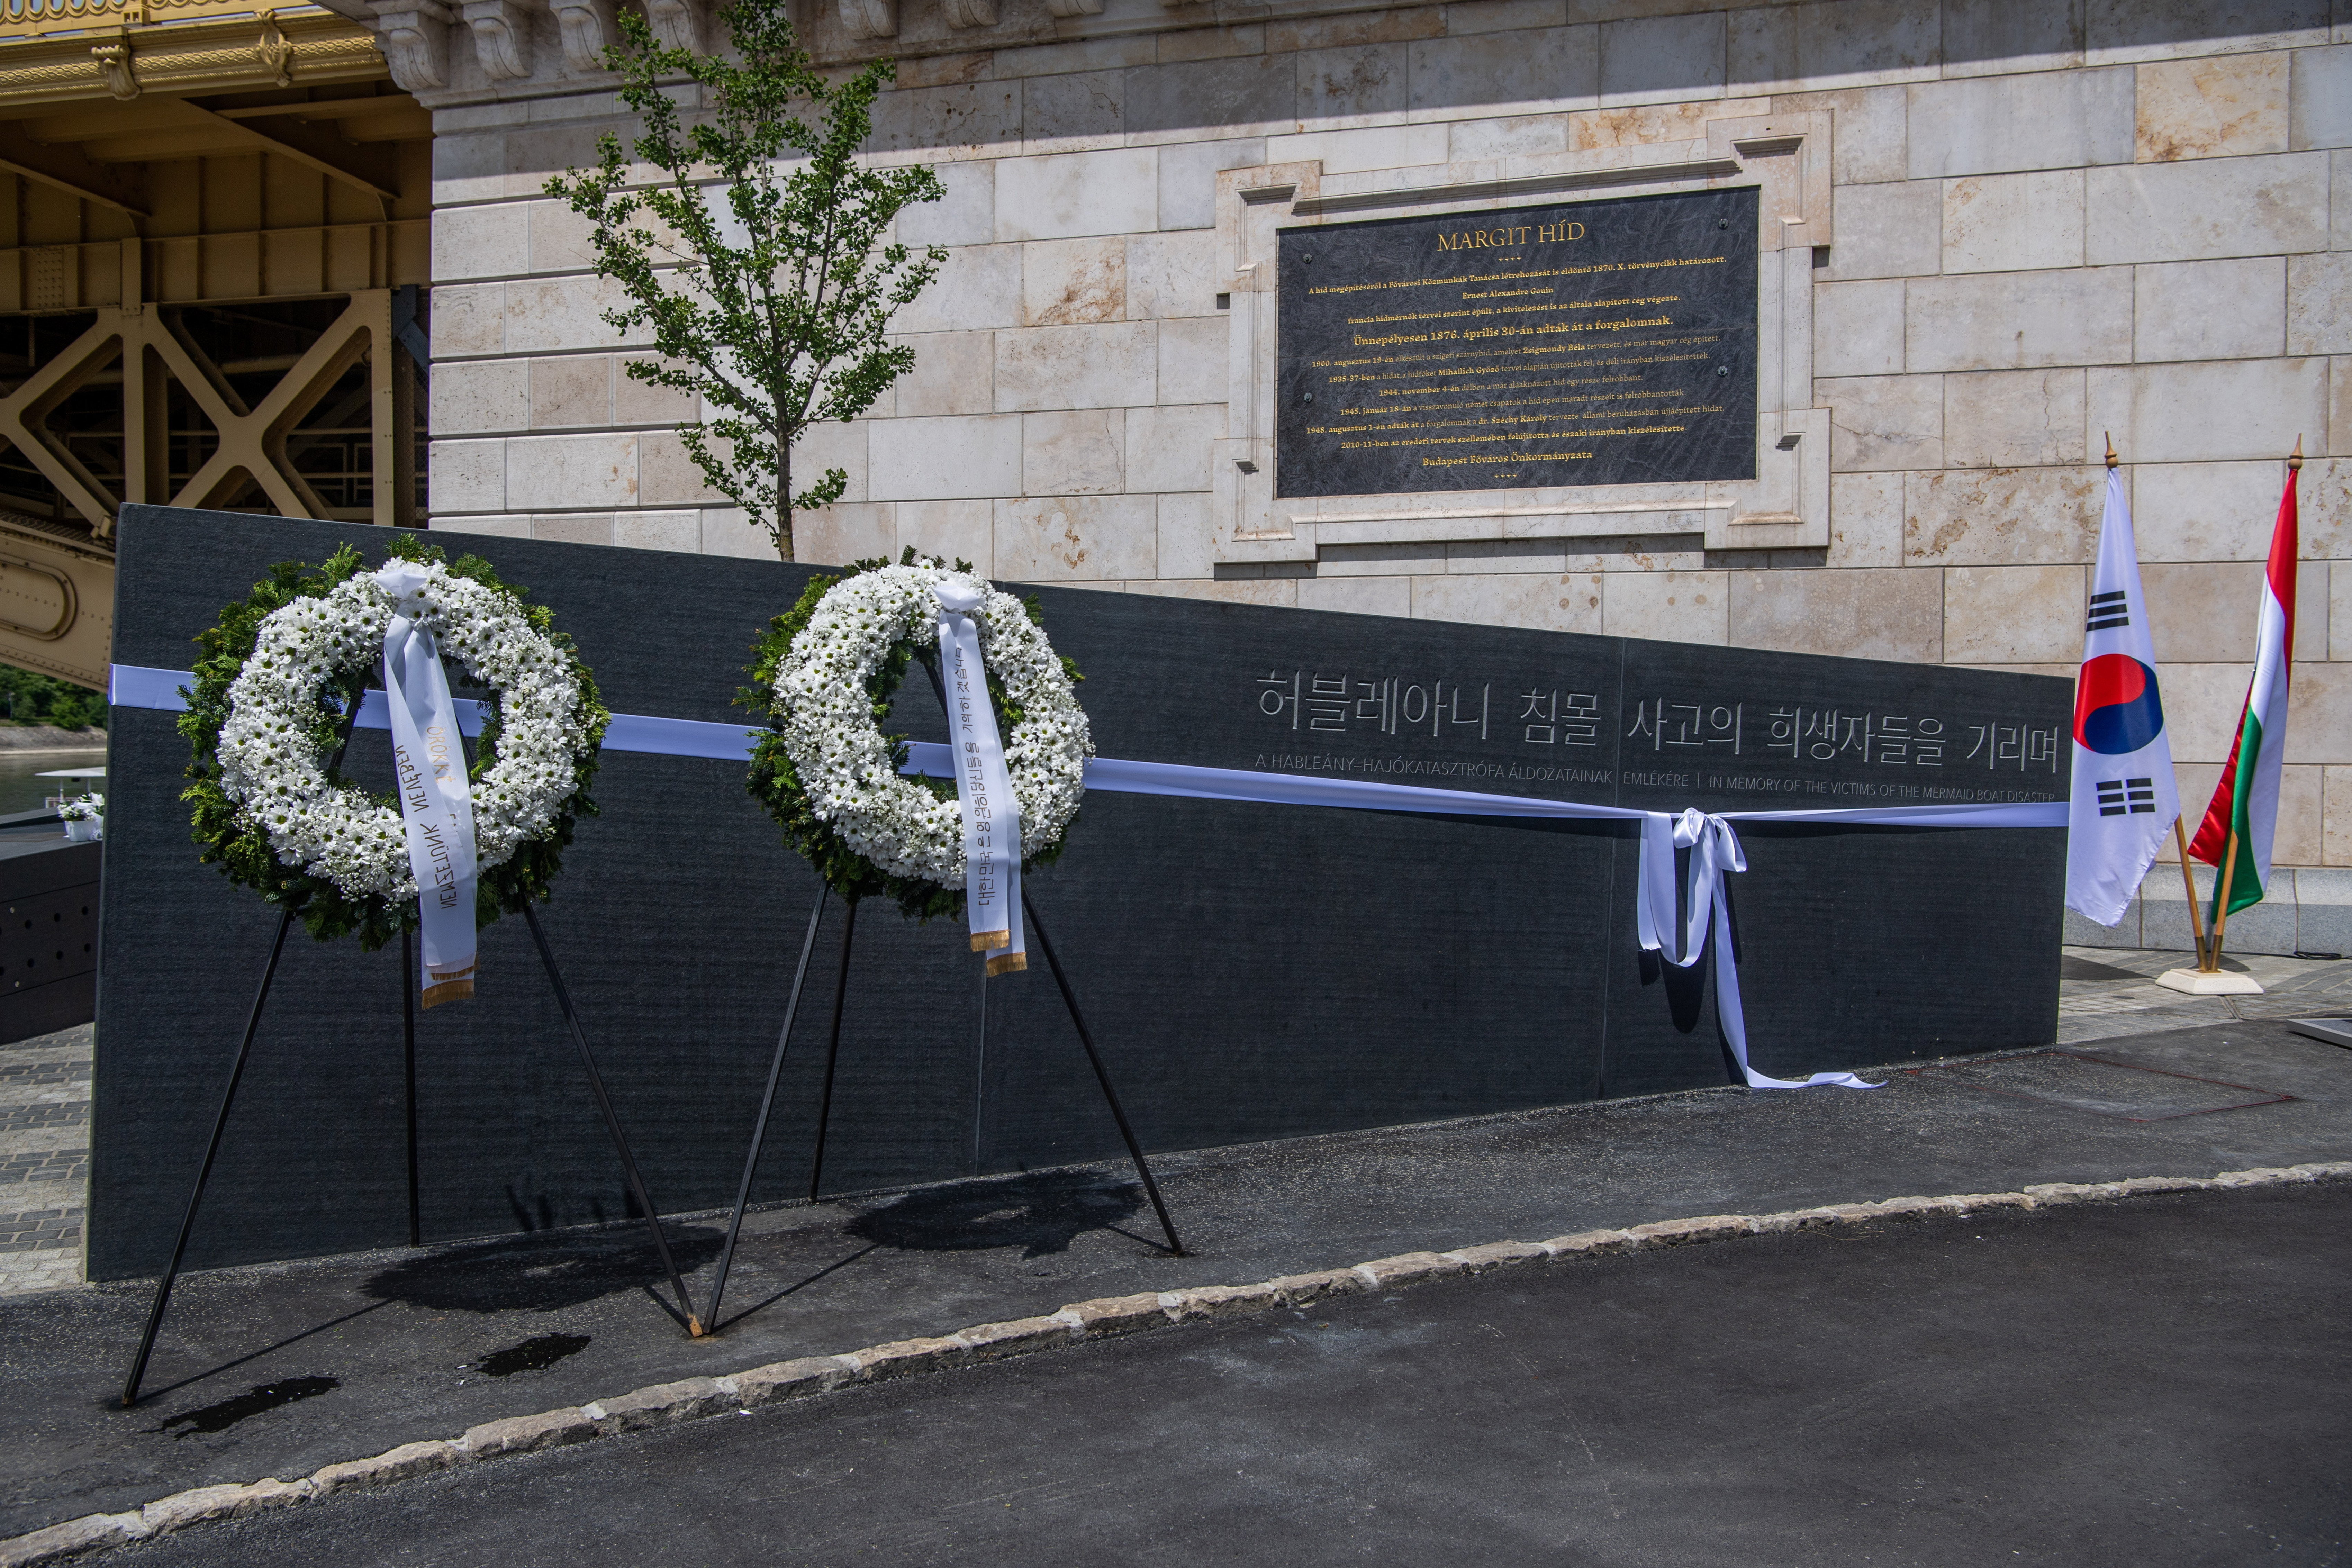 Memorial to victims of Danube boat collision inaugurated